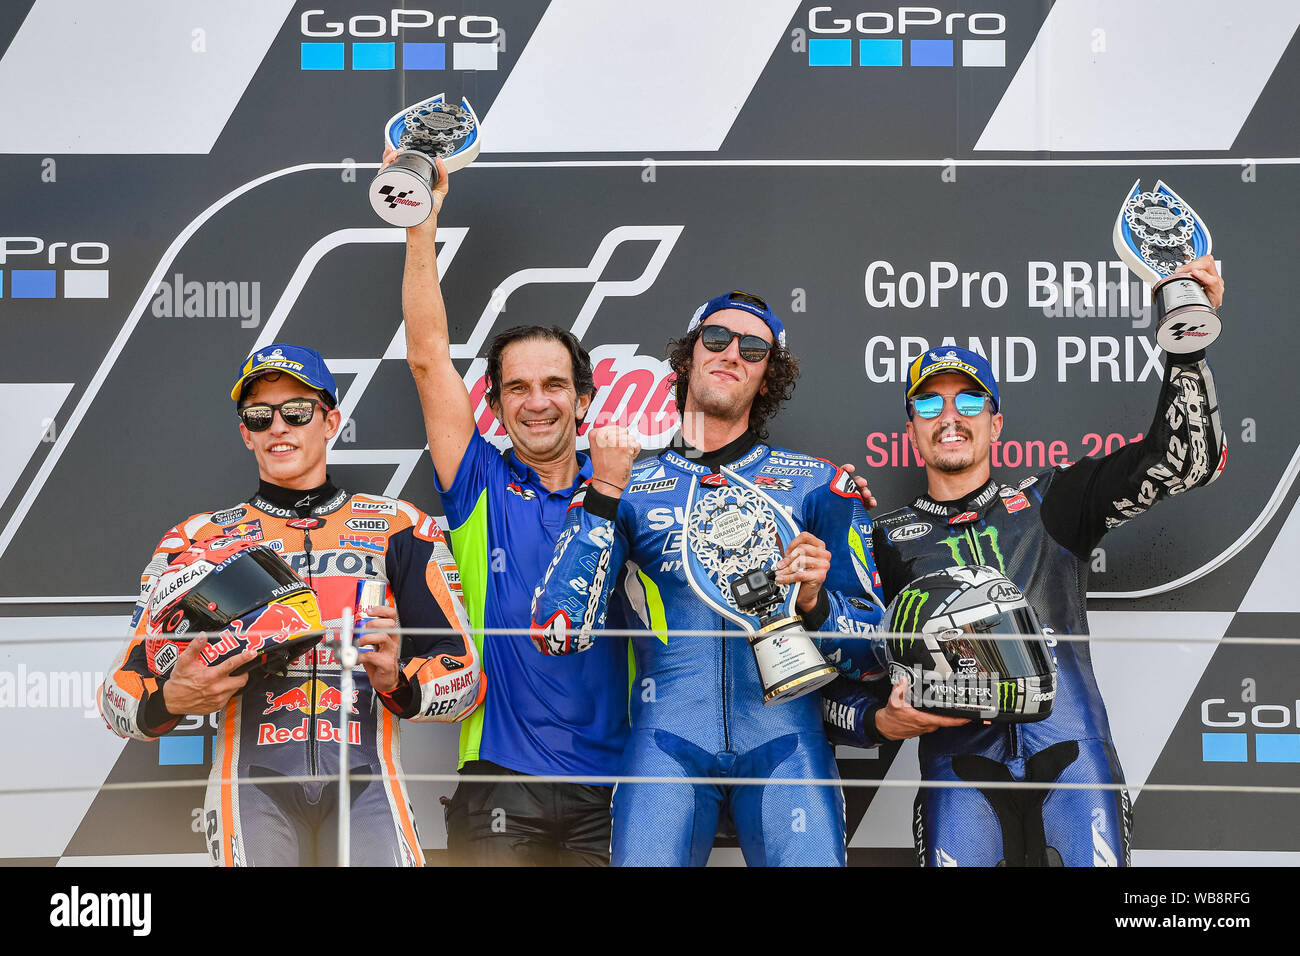 Towcester, UK. 25th Aug, 2019. The winner Alex Rins (SPA) of Team SUZUKI ECSTAR (centre), second place Marc Marquez (SPA) of Repsol Honda Team (left) and Maverick Vinales (SPA) of Monster Energy Yamaha MotoGP (3rd place, right) winner’s presentation after the Sunday’s Race of  GoPro British Grand Prix at Silverstone Circuit on Sunday, August 25, 2019 in TOWCESTER, ENGLAND. Credit: Taka G Wu/Alamy Live News Stock Photo